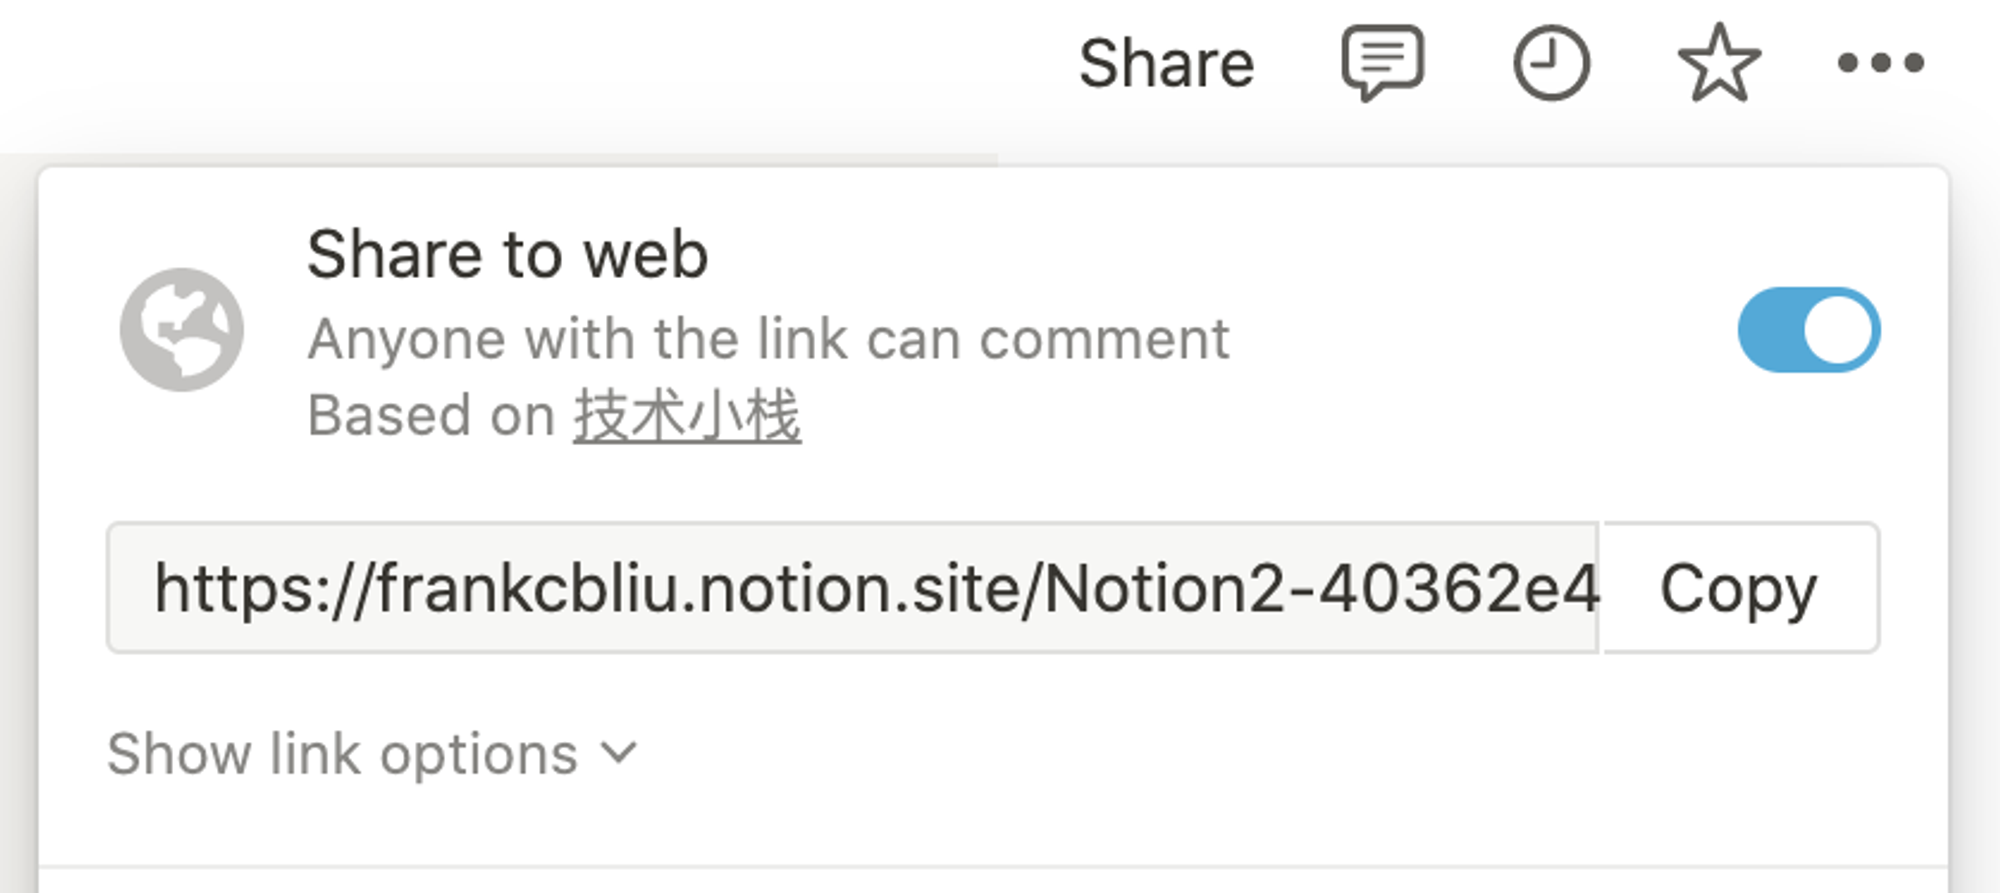 Notion 页面右上角的 Share → Share to web